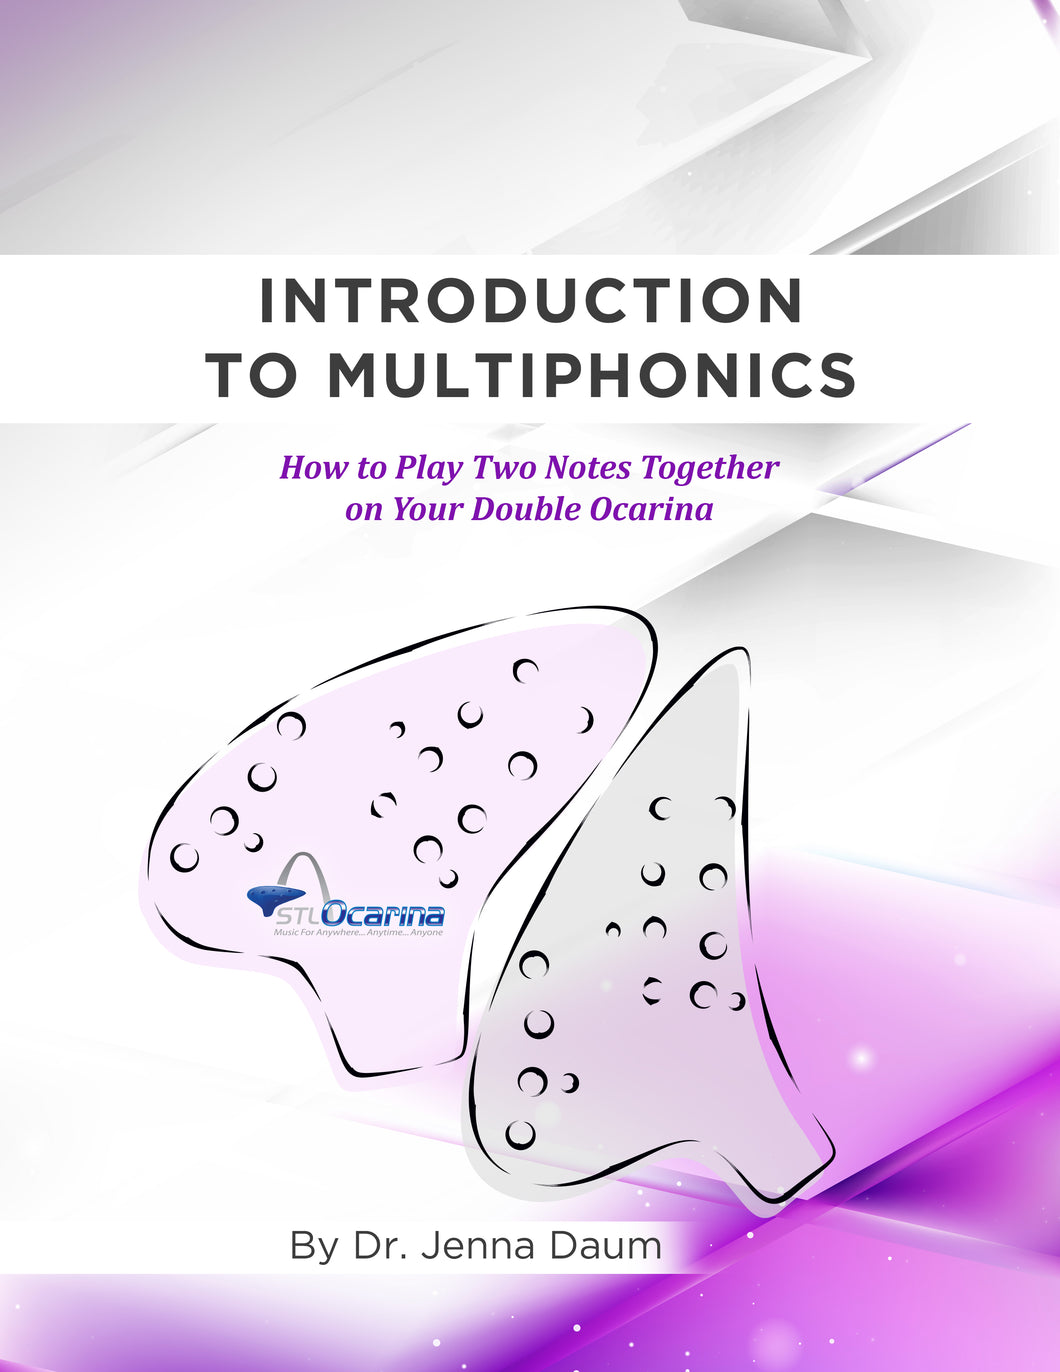 Introduction to Multiphonics - How to Play Two Notes Together on Your Double Ocarina